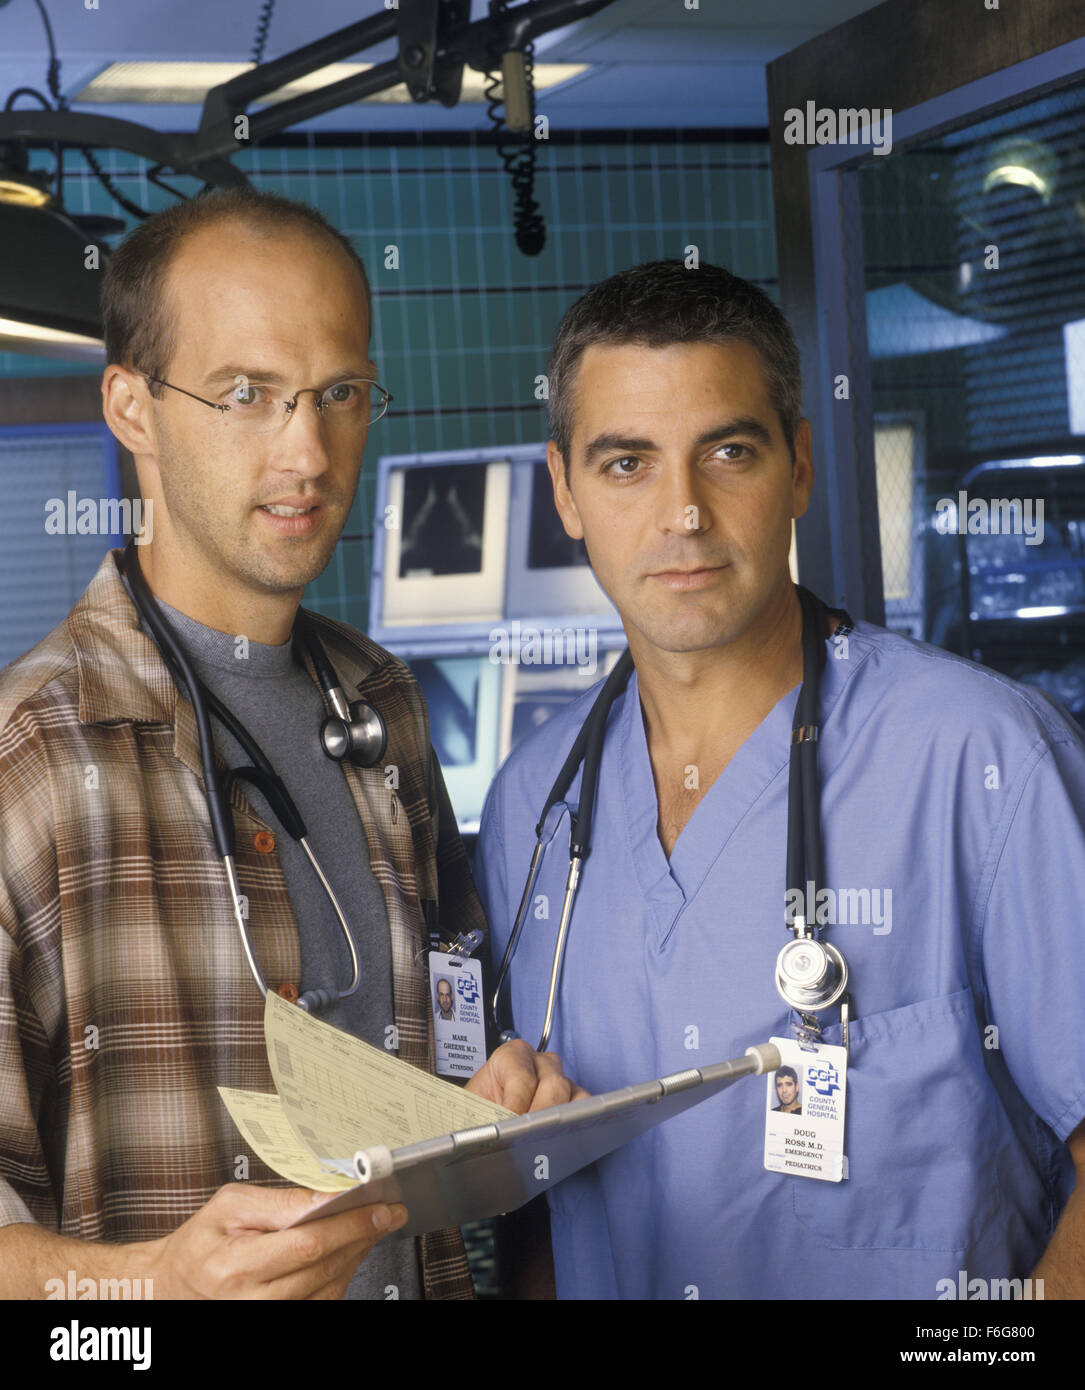 RELEASE DATE: TV series September 19, 1994 - 2009. TITLE: ER. STUDIO: . PLOT: The work and lives of a group of emergency room doctors in Chicago. PICTURED: ANTHONY EDWARDS plays Dr Greene and GEORGE CLOONEY plays Dr Ross. Stock Photo